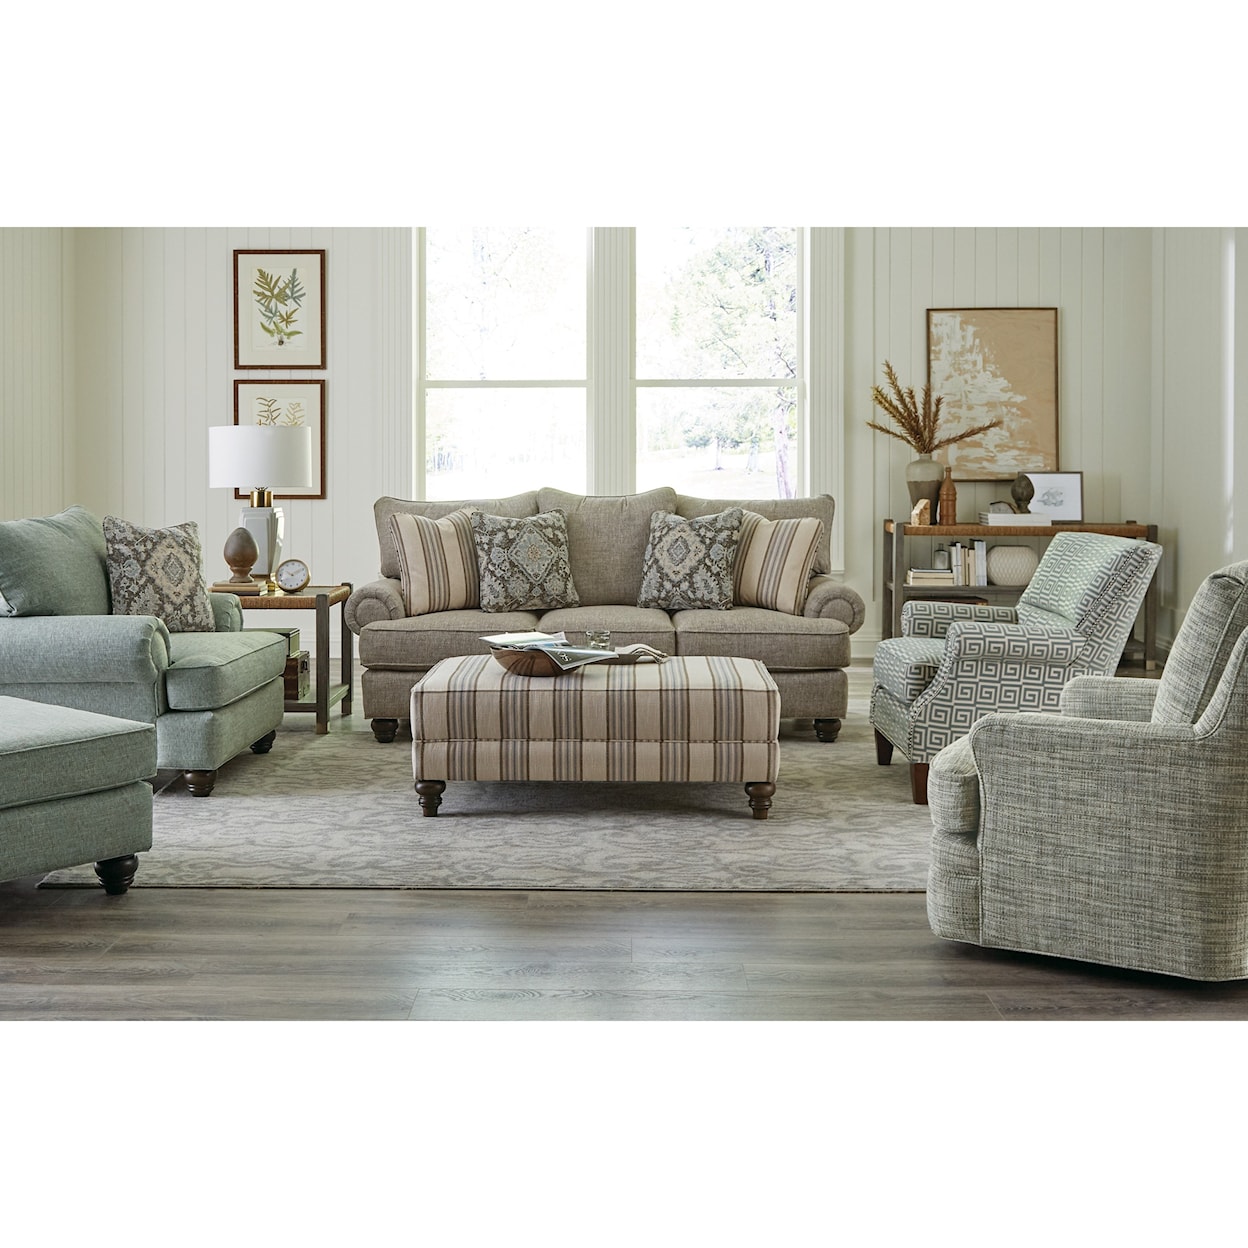 Hickory Craft 700450 Living Room Group